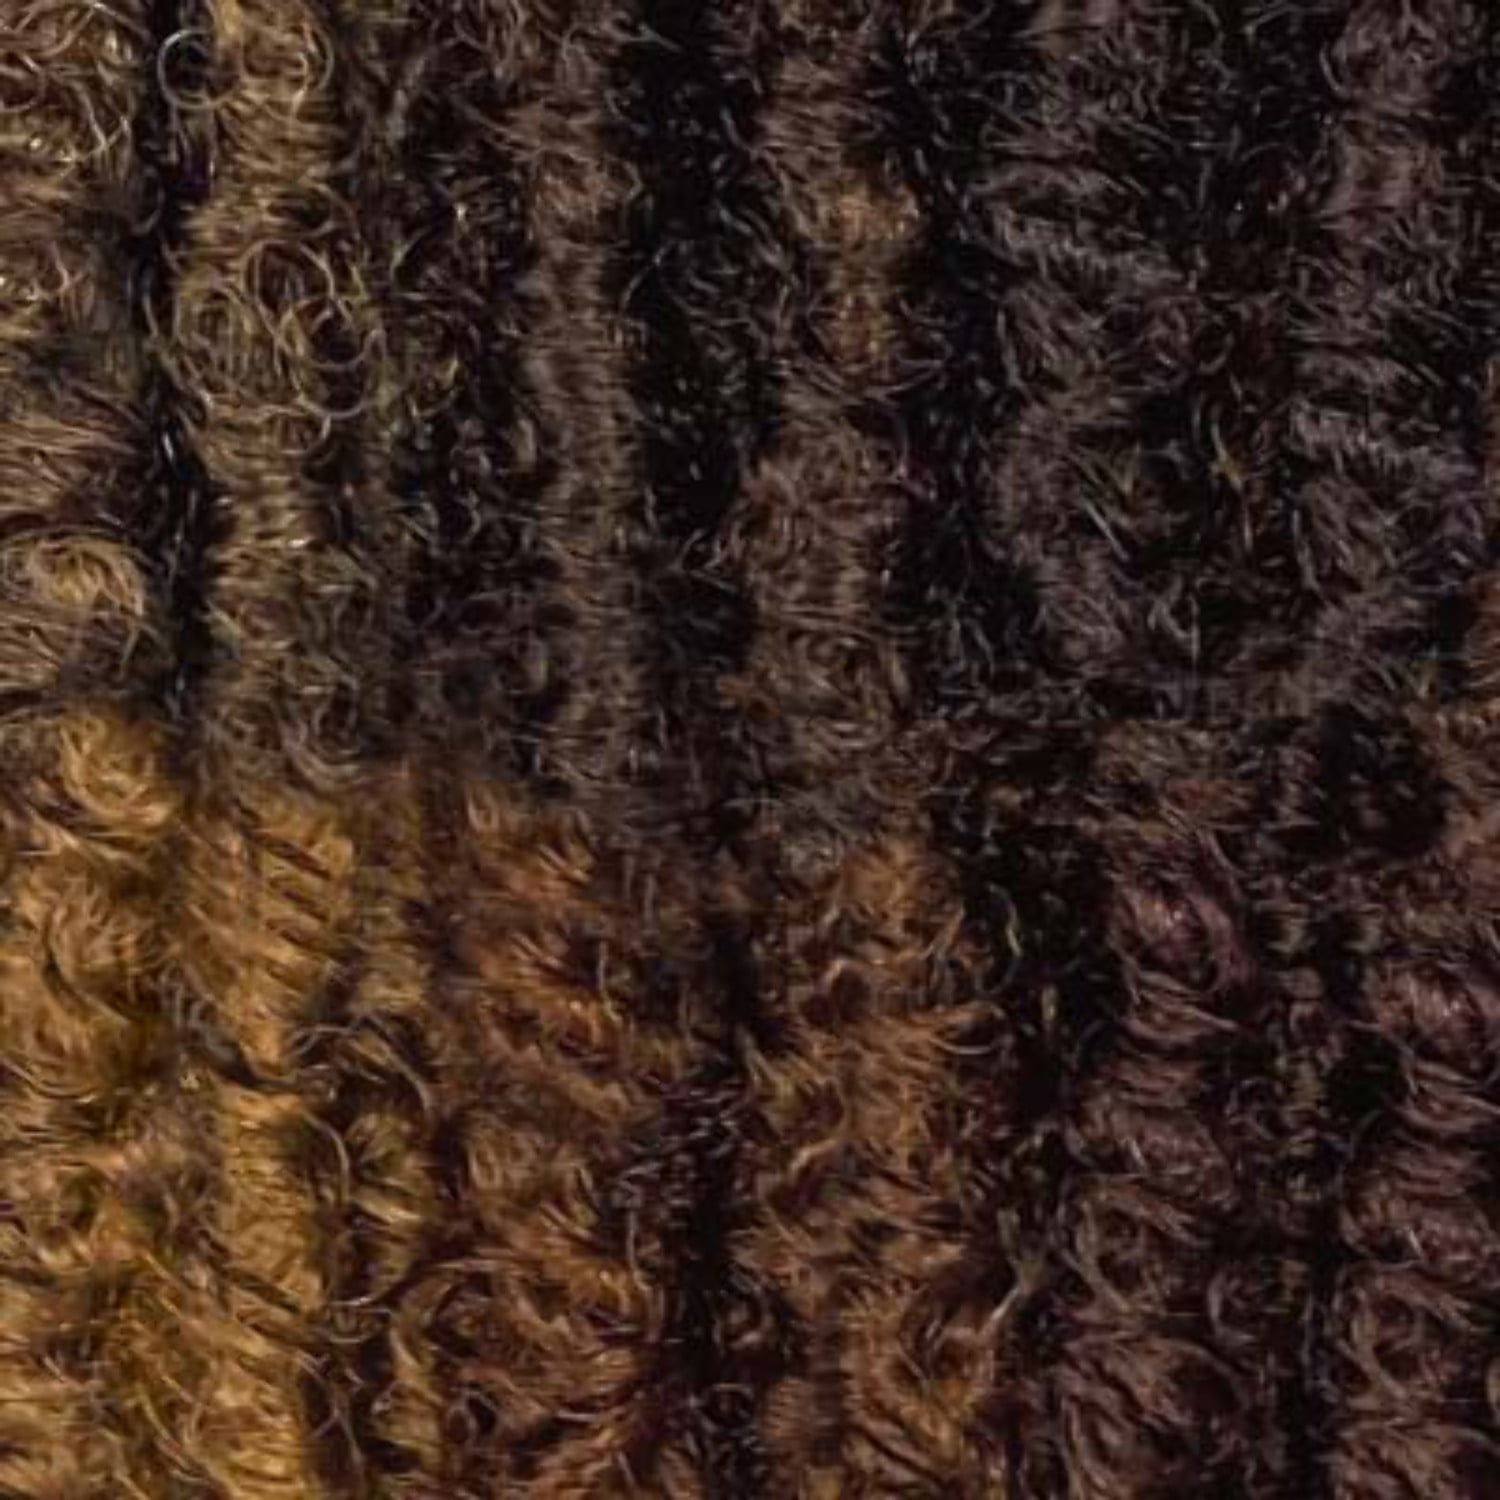 Outre Crochet Braids X-Pression Twisted Up Water Wave Fro Twist 22 2X